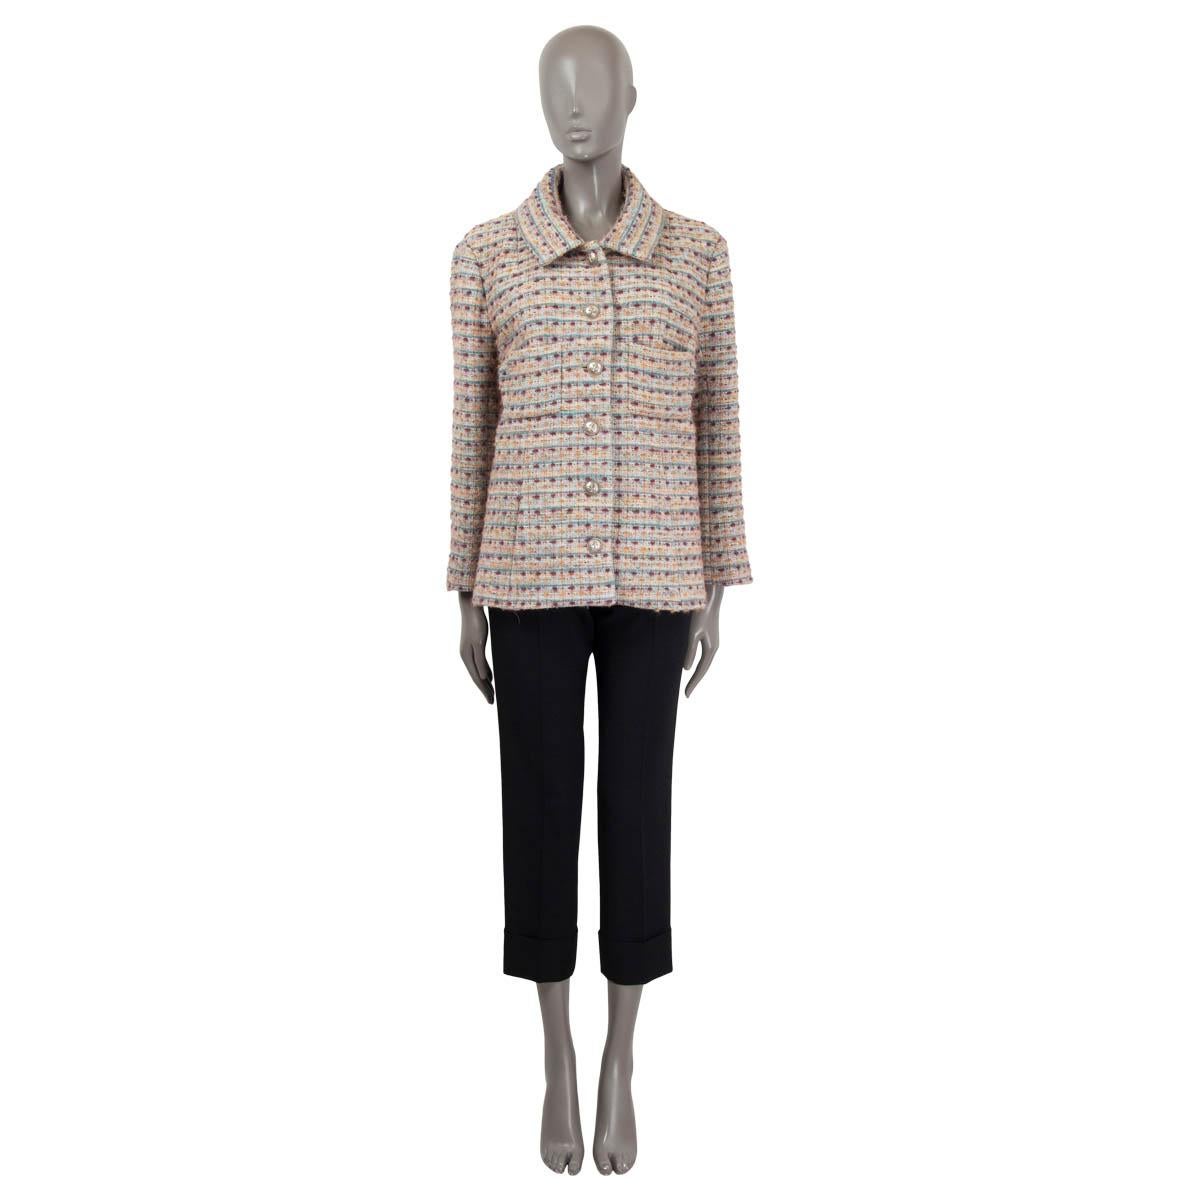 100% authentic Chanel 2018 Hamburg bouclé tweed jacket in pale petrol, plum, pink, yellow and beige wool (51%), viscose (18%), polyamide (15%), mohair (5%), alpaca (5%), polyester (4%) and acrylic (2%). The design features six anchor embellished